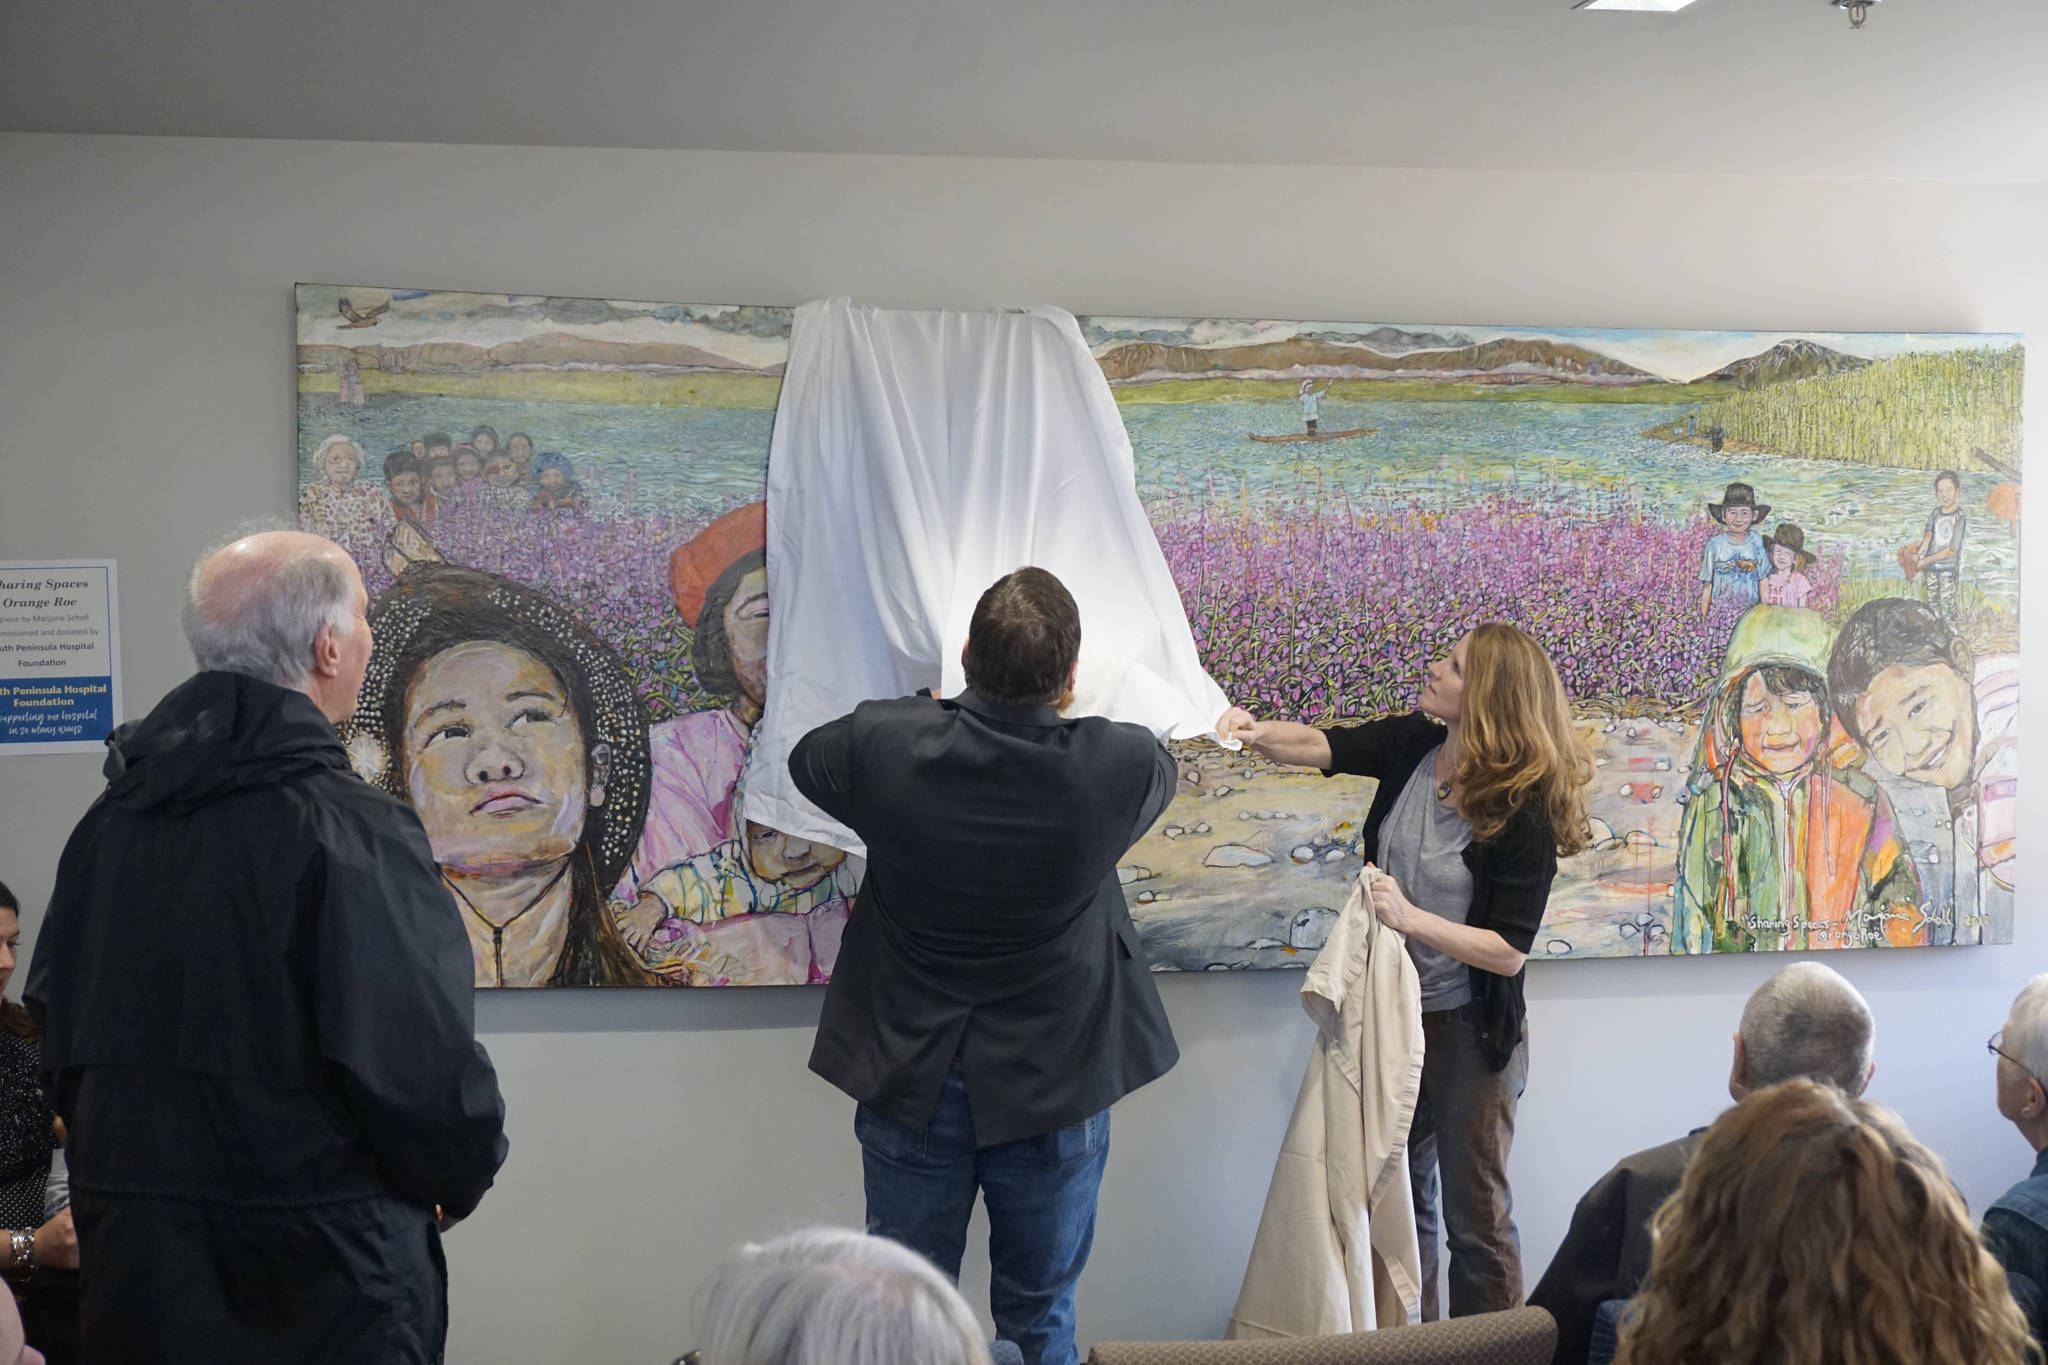 Homer artist Marjorie Scholl, far right, unveils her new painting, “Sharing Spaces Orange Roe,” at an open house for the expanded and remodeled clinic last Friday, March 30, 2018 on Bartlett Street in Homer, Alaska. The South Peninsula Hospital Foundation commissioned and donated the painting to the clinic. (Photo by Michael Armstrong, Homer News)